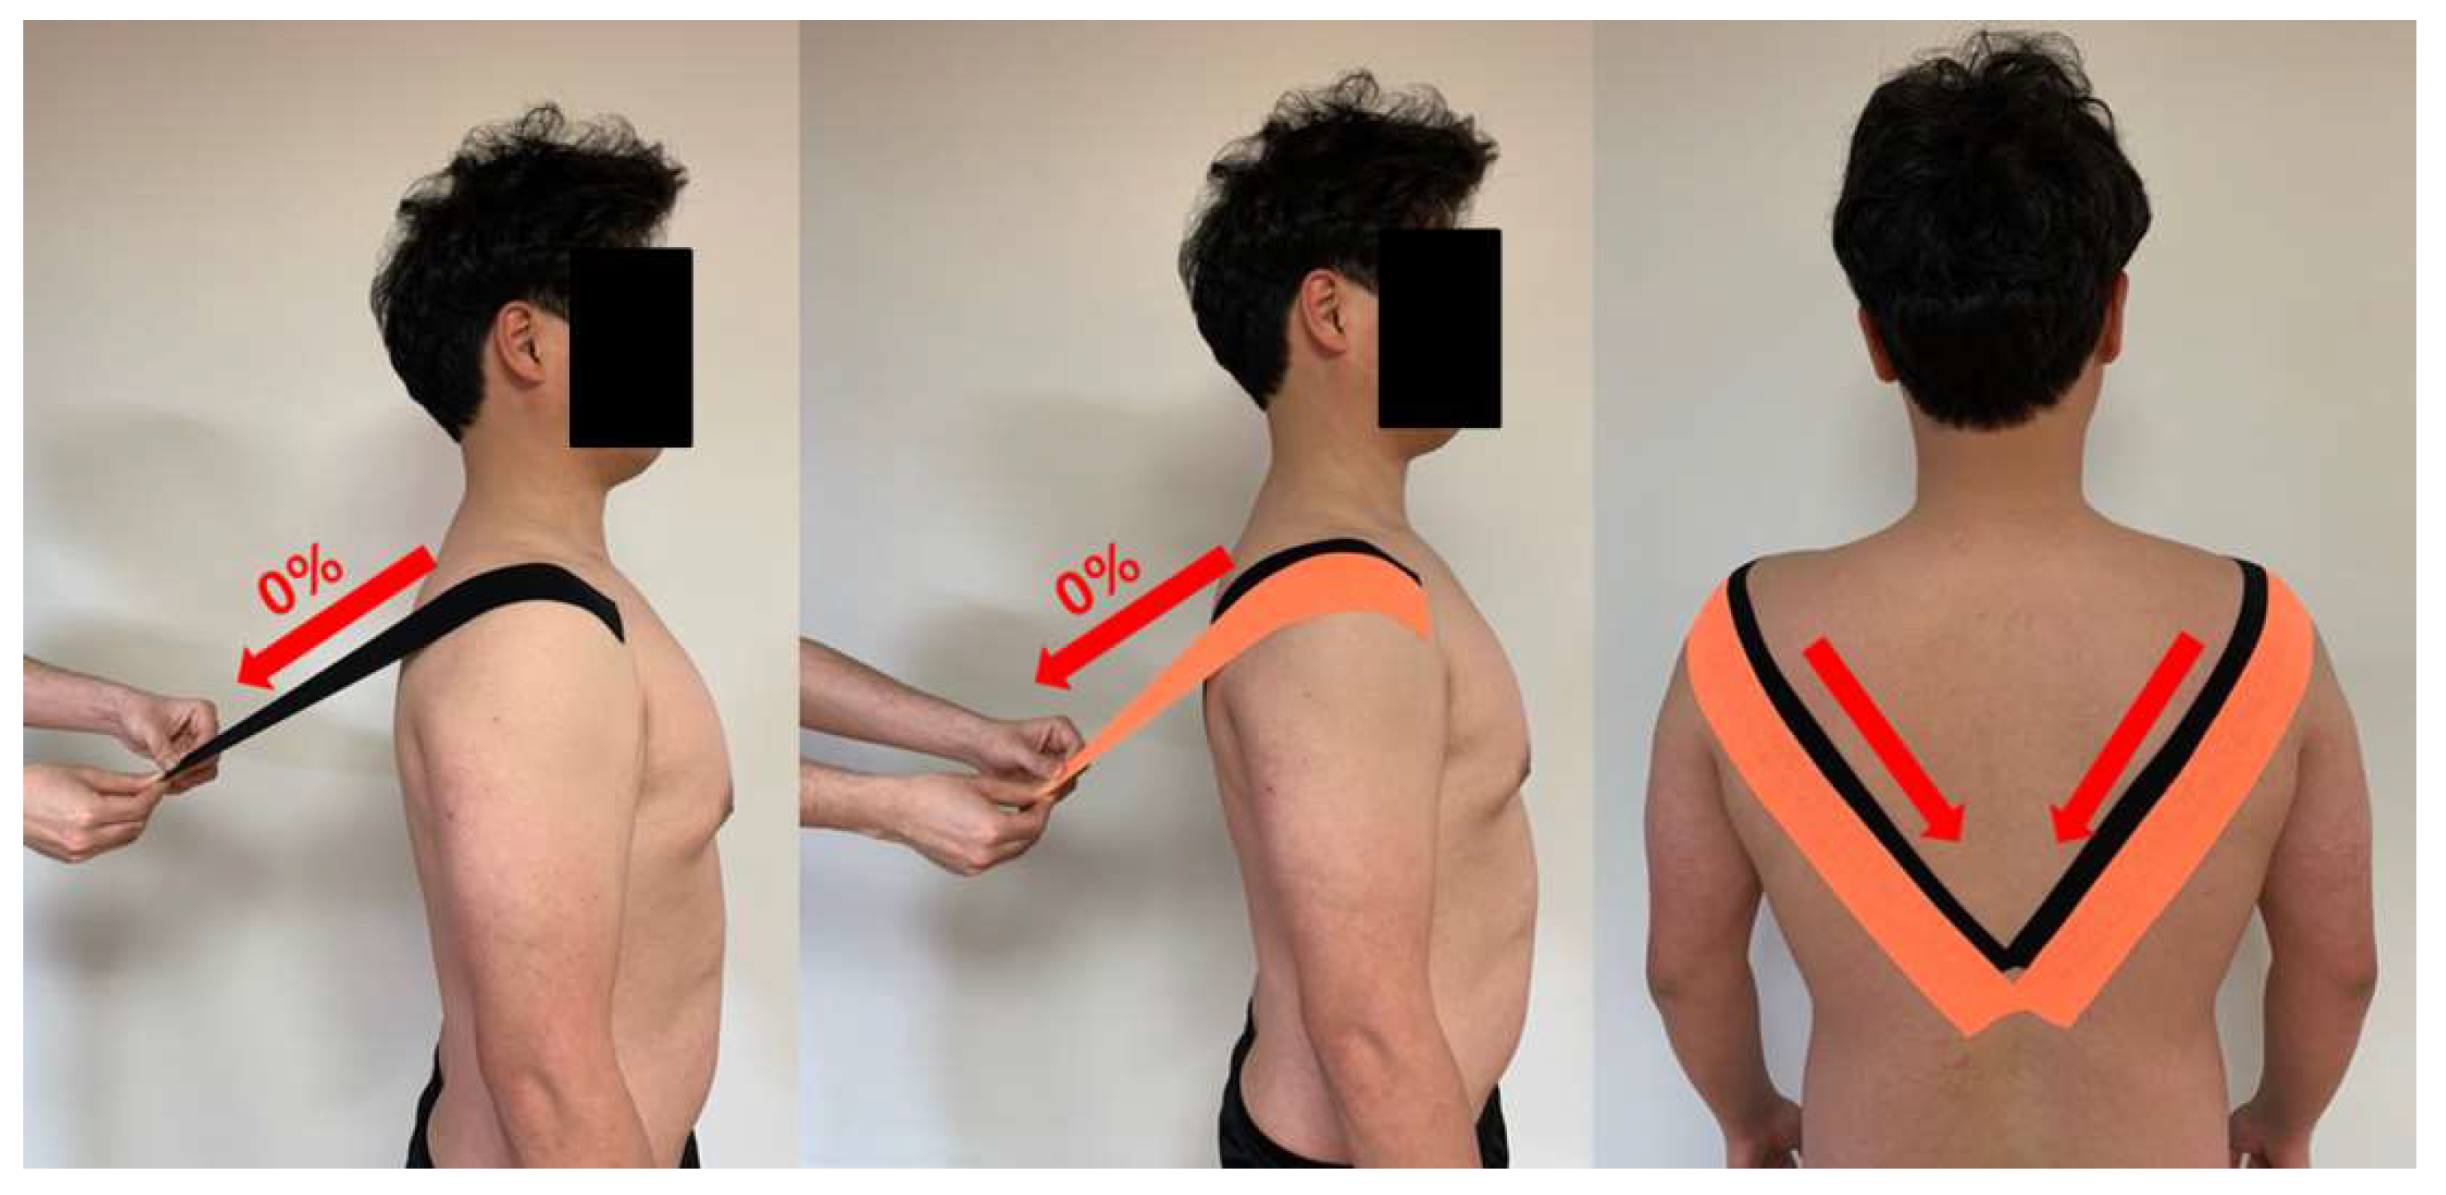 Is Rounded Shoulders And Forwarded Head Causing Pain?